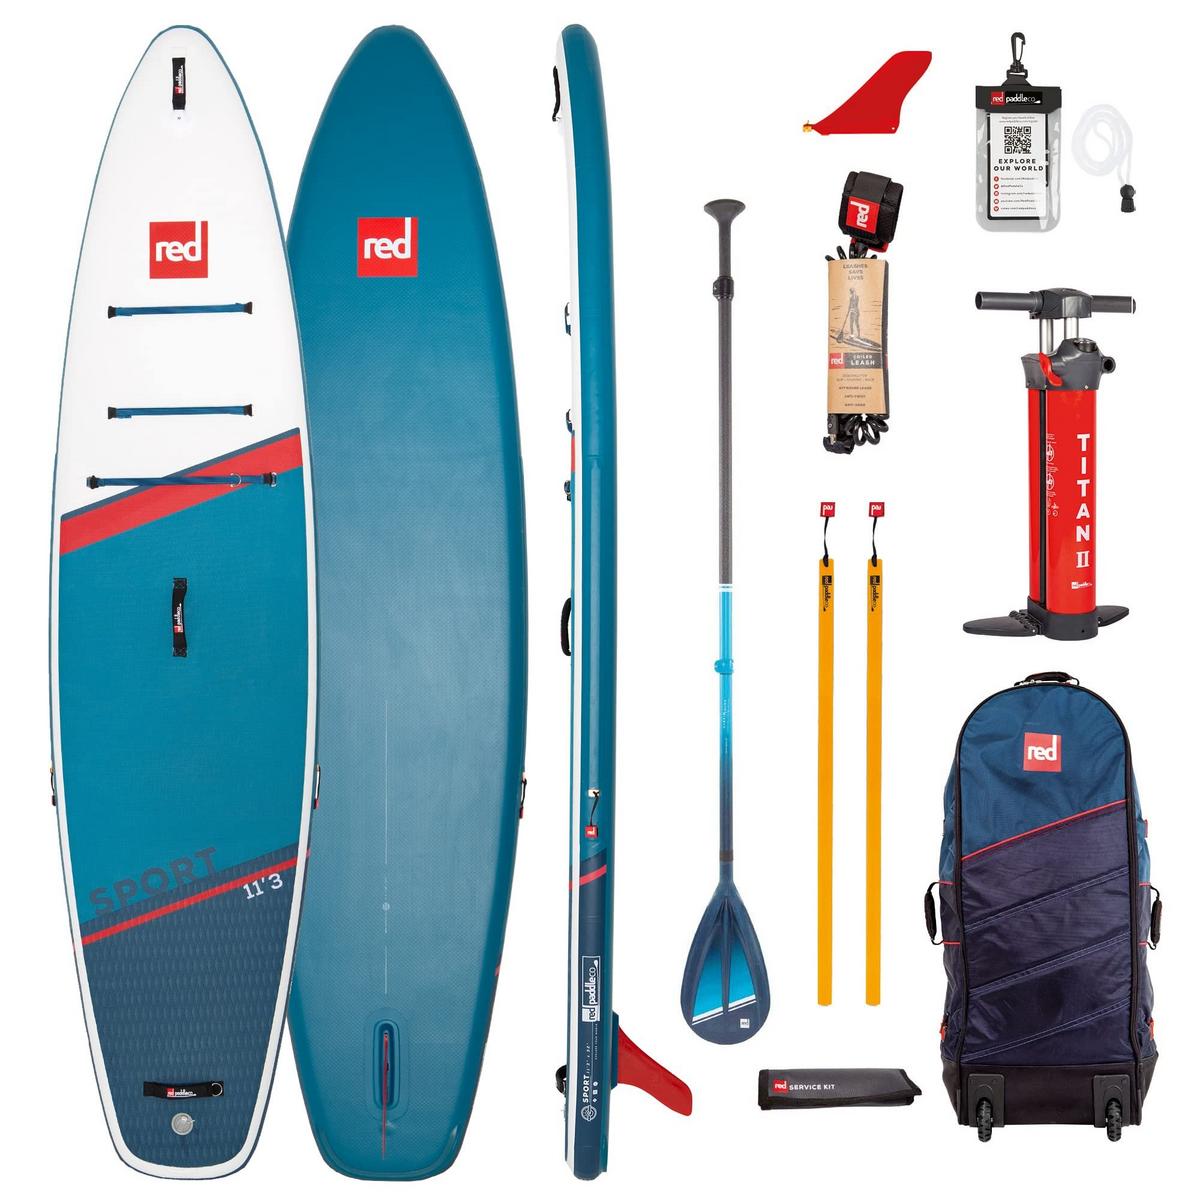 Red Equipment Sport 11ft 3in SUP Pack (Hybrid Tough Paddle) - Blue